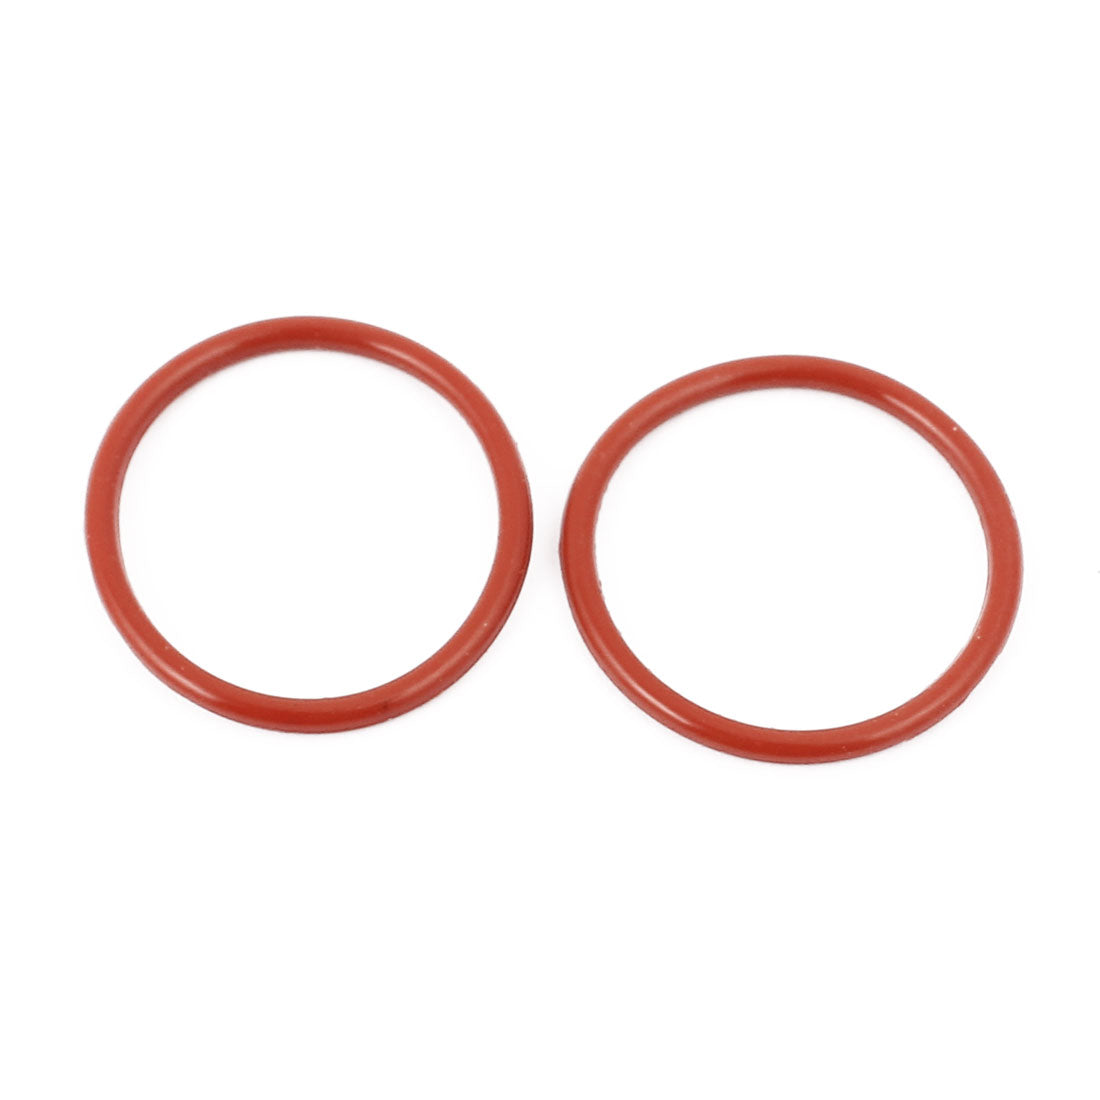 uxcell Uxcell 30Pcs Red 20mm x 1.5mm Silicone Rubber Gasket O Ring Sealing Ring Heat Resistant